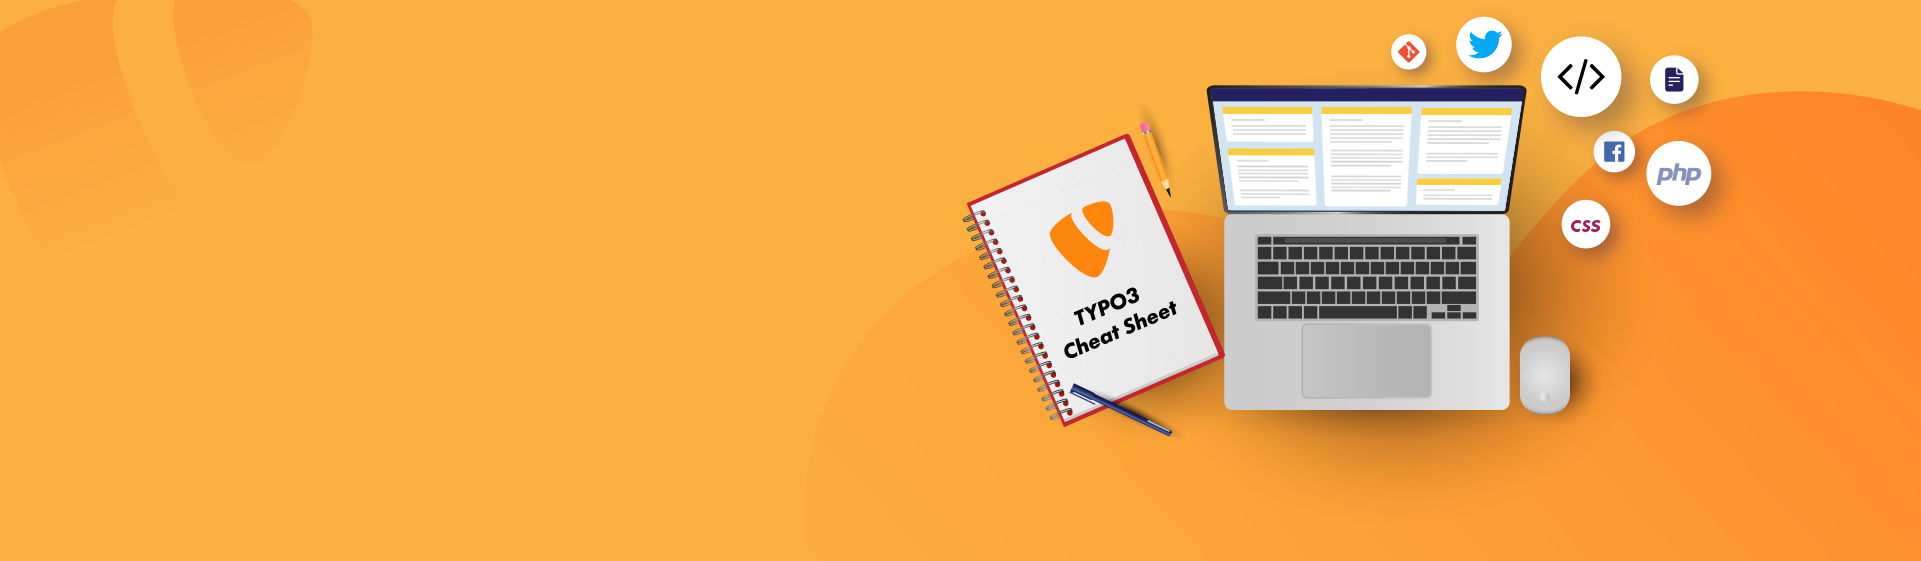 15 TYPO3 Cheat Sheets For Everyone!